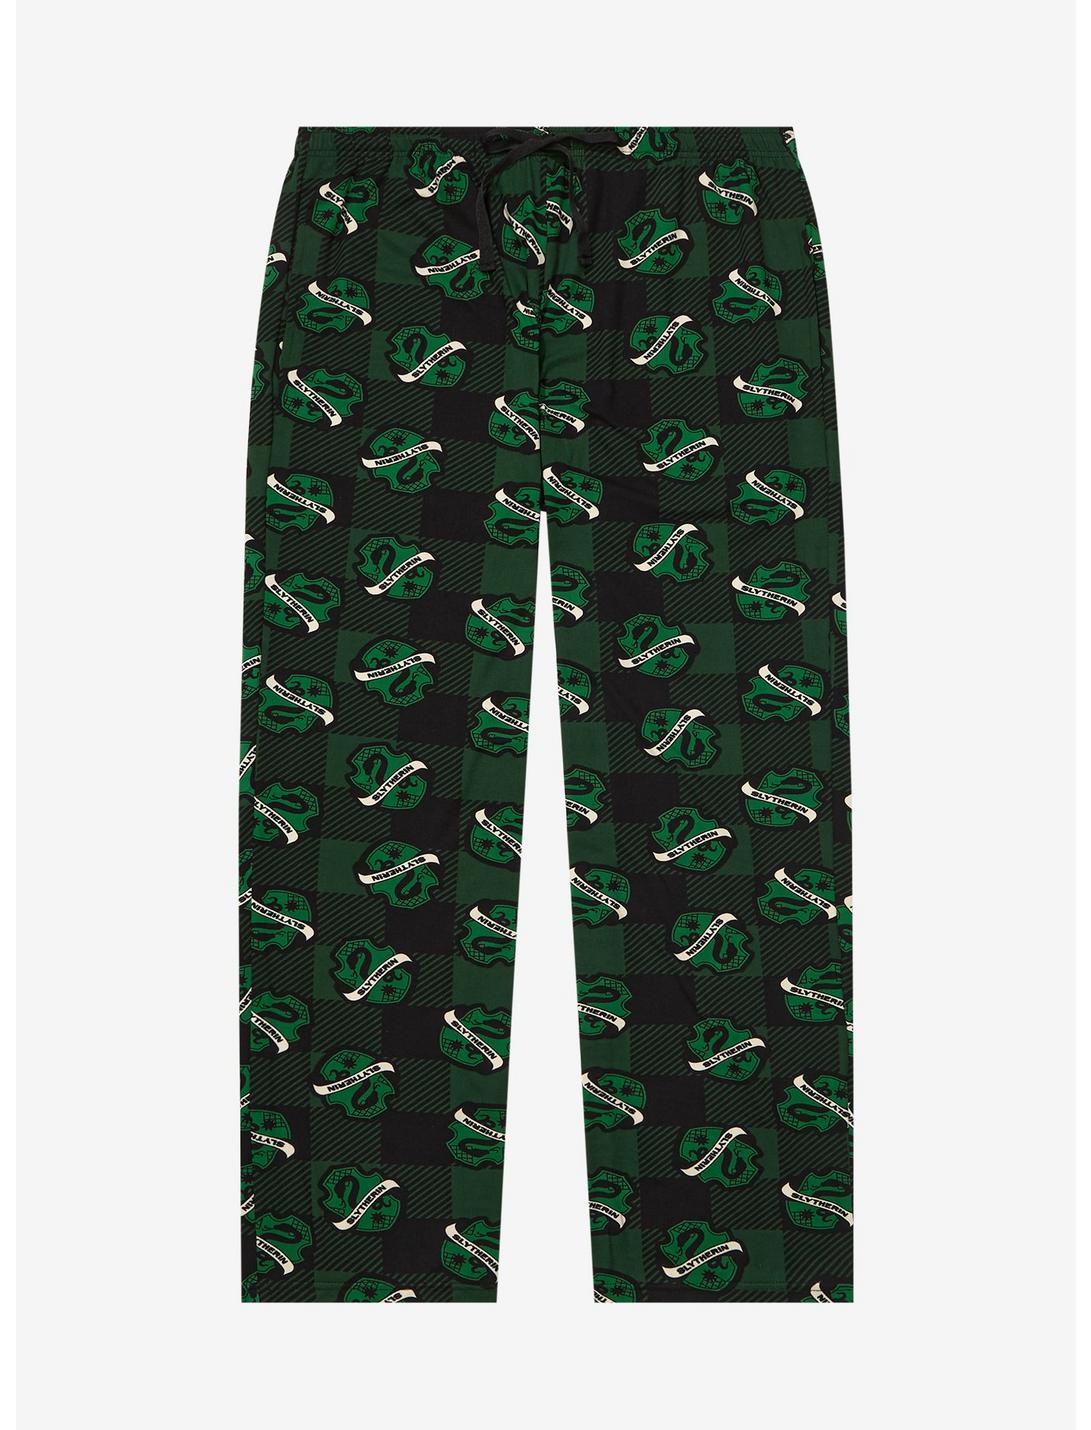 Harry Potter Plaid Slytherin Allover Print Plus Size Sleep Pants - BoxLunch Exclusive, GREEN, hi-res